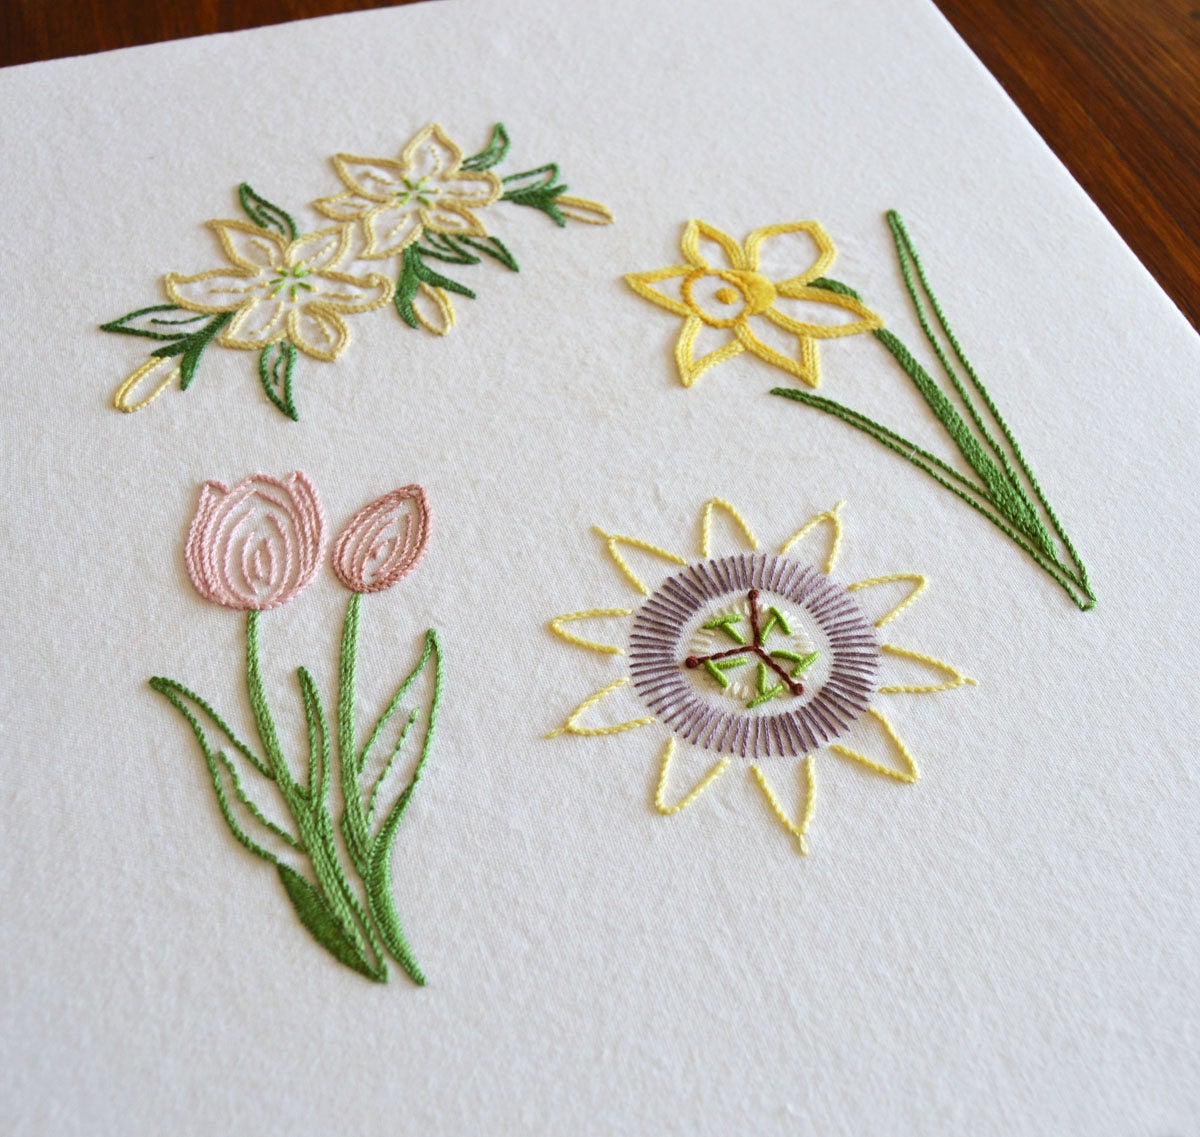 Embroidery Patterns Flowers Easter Flowers Hand Embroidery Pattern Modern Embroidery Easter Lily Tulip Daffodil Passion Flower Embroidery Patterns Pdf Pattern